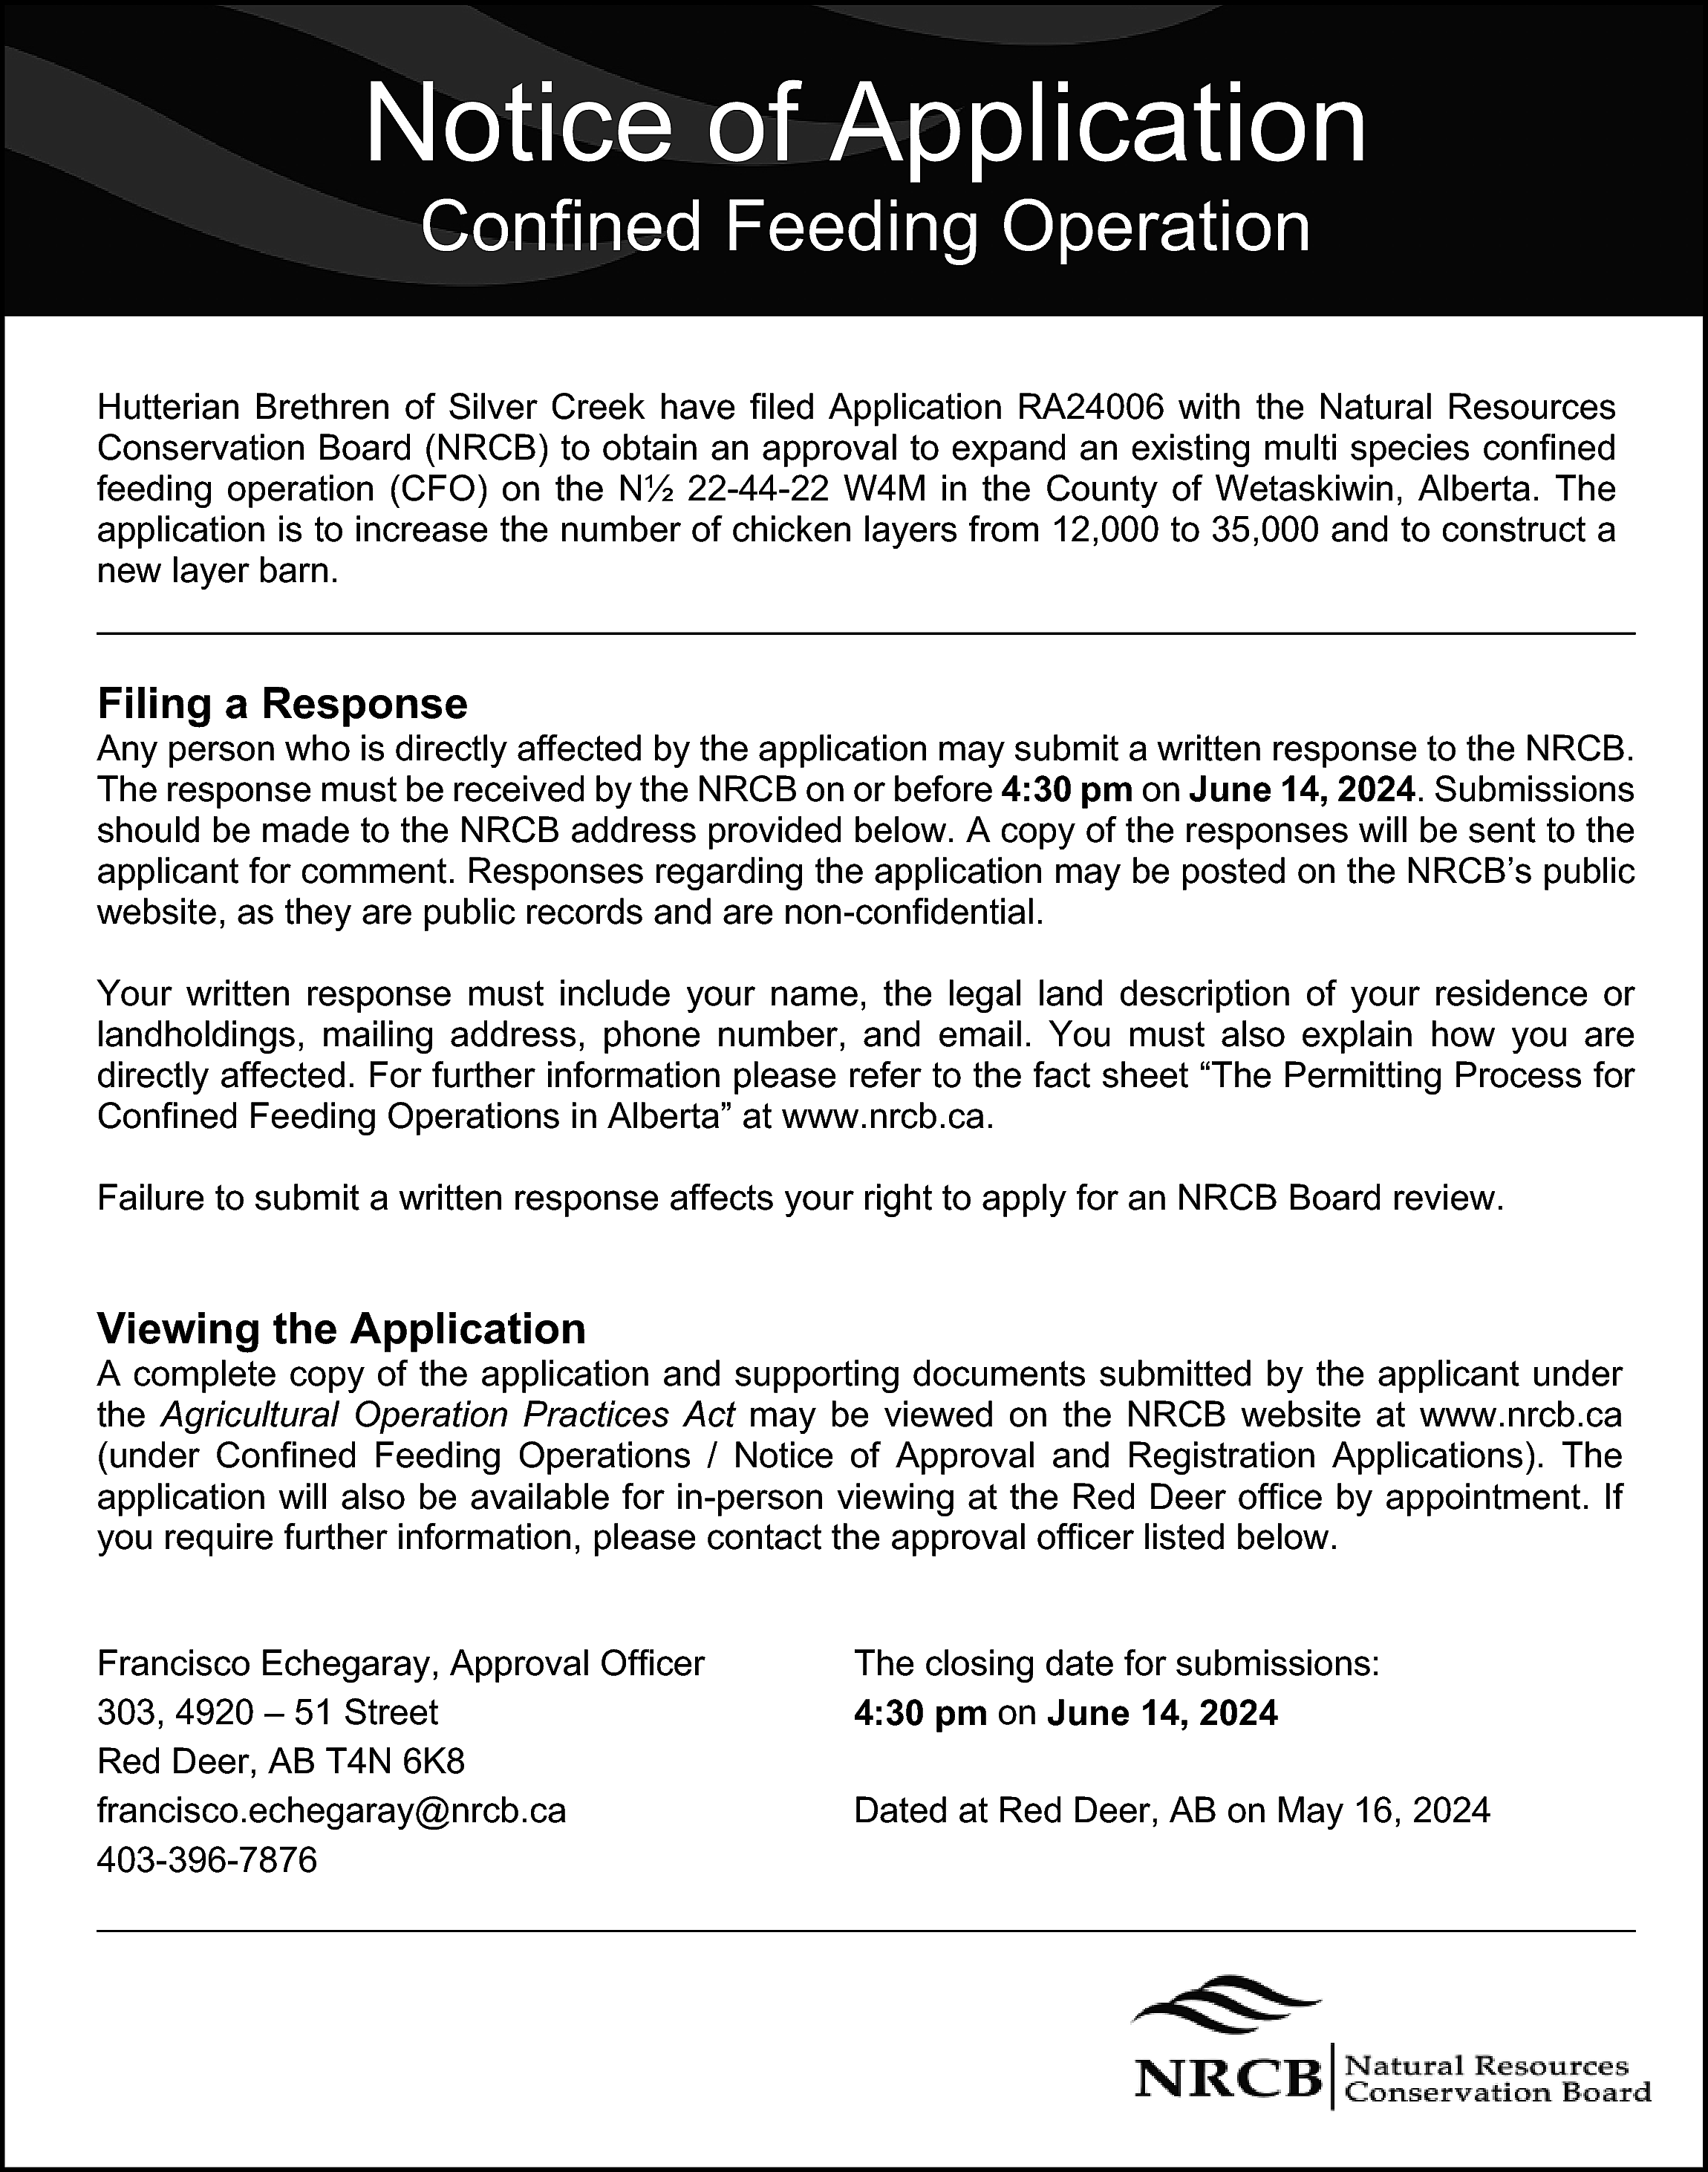 Notice of Application <br>Confined Feeding  Notice of Application  Confined Feeding Operation    Hutterian Brethren of Silver Creek have filed Application RA24006 with the Natural Resources  Conservation Board (NRCB) to obtain an approval to expand an existing multi species confined  feeding operation (CFO) on the N½ 22-44-22 W4M in the County of Wetaskiwin, Alberta. The  application is to increase the number of chicken layers from 12,000 to 35,000 and to construct a  new layer barn.    Filing a Response    Any person who is directly affected by the application may submit a written response to the NRCB.  The response must be received by the NRCB on or before 4:30 pm on June 14, 2024. Submissions  should be made to the NRCB address provided below. A copy of the responses will be sent to the  applicant for comment. Responses regarding the application may be posted on the NRCB’s public  website, as they are public records and are non-confidential.  Your written response must include your name, the legal land description of your residence or  landholdings, mailing address, phone number, and email. You must also explain how you are  directly affected. For further information please refer to the fact sheet “The Permitting Process for  Confined Feeding Operations in Alberta” at www.nrcb.ca.  Failure to submit a written response affects your right to apply for an NRCB Board review.    Viewing the Application    A complete copy of the application and supporting documents submitted by the applicant under  the Agricultural Operation Practices Act may be viewed on the NRCB website at www.nrcb.ca  (under Confined Feeding Operations / Notice of Approval and Registration Applications). The  application will also be available for in-person viewing at the Red Deer office by appointment. If  you require further information, please contact the approval officer listed below.  Francisco Echegaray, Approval Officer  303, 4920 – 51 Street  Red Deer, AB T4N 6K8  francisco.echegaray@nrcb.ca  403-396-7876    The closing date for submissions:  4:30 pm on June 14, 2024  Dated at Red Deer, AB on May 16, 2024    